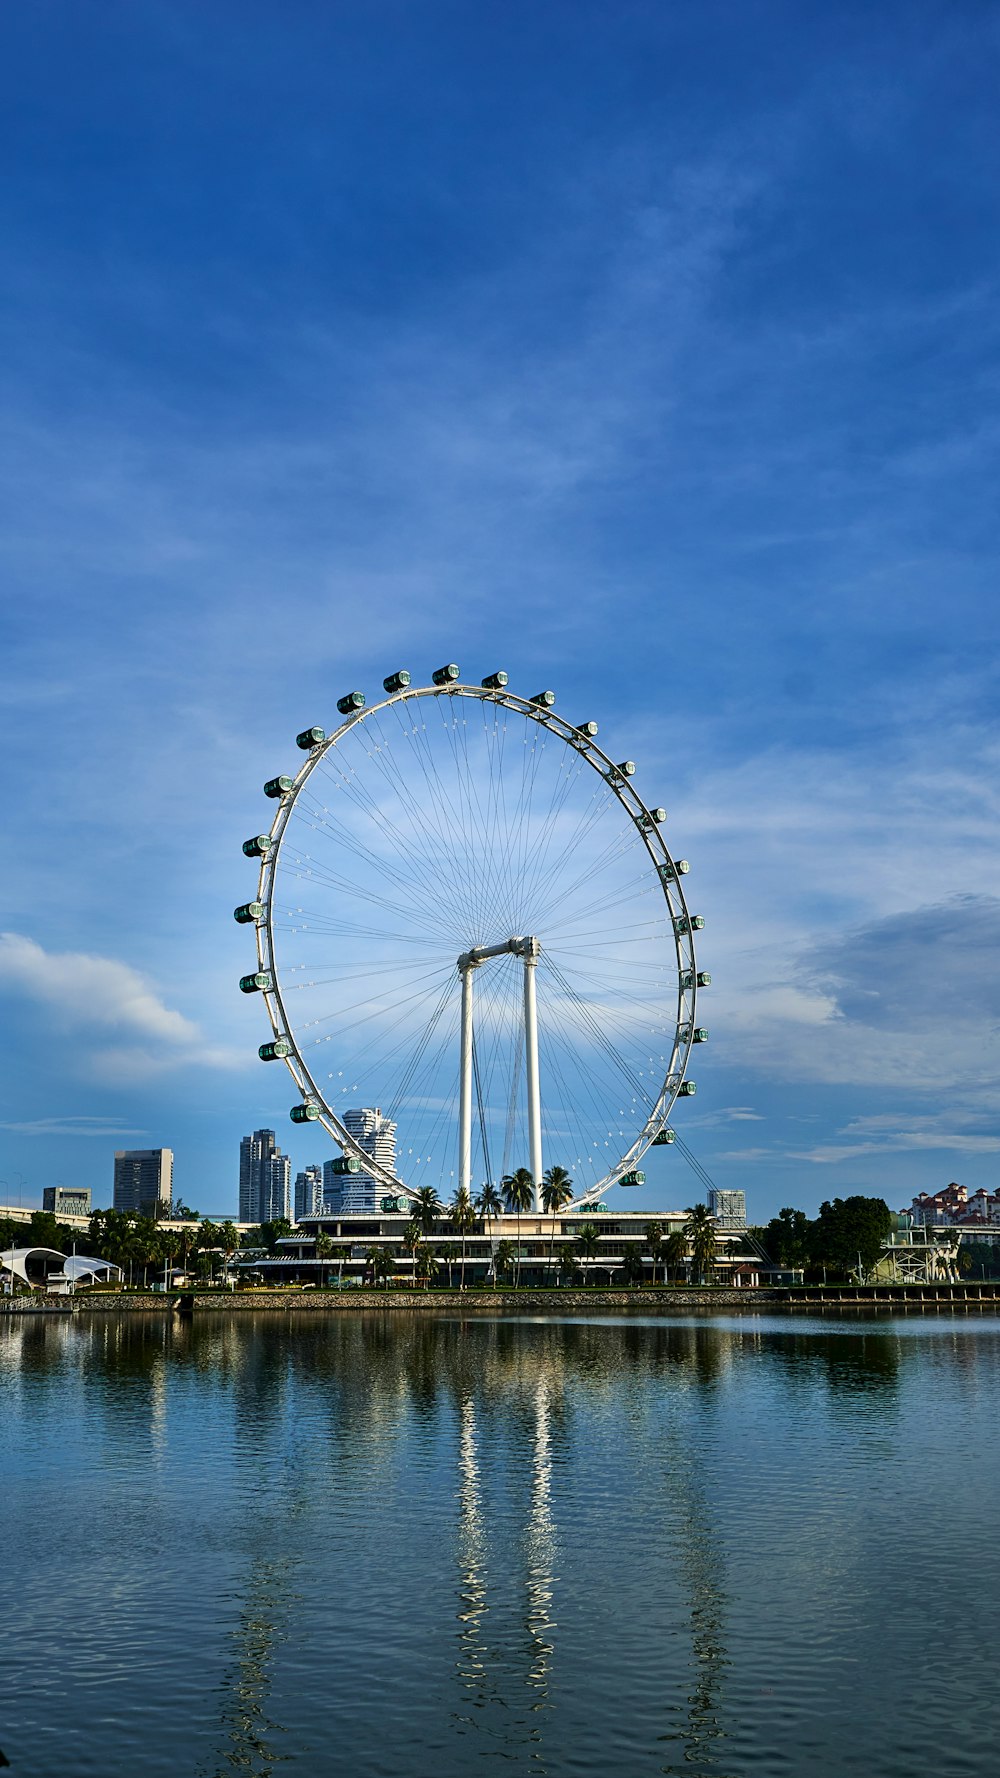 a large ferris wheel sitting above a body of water